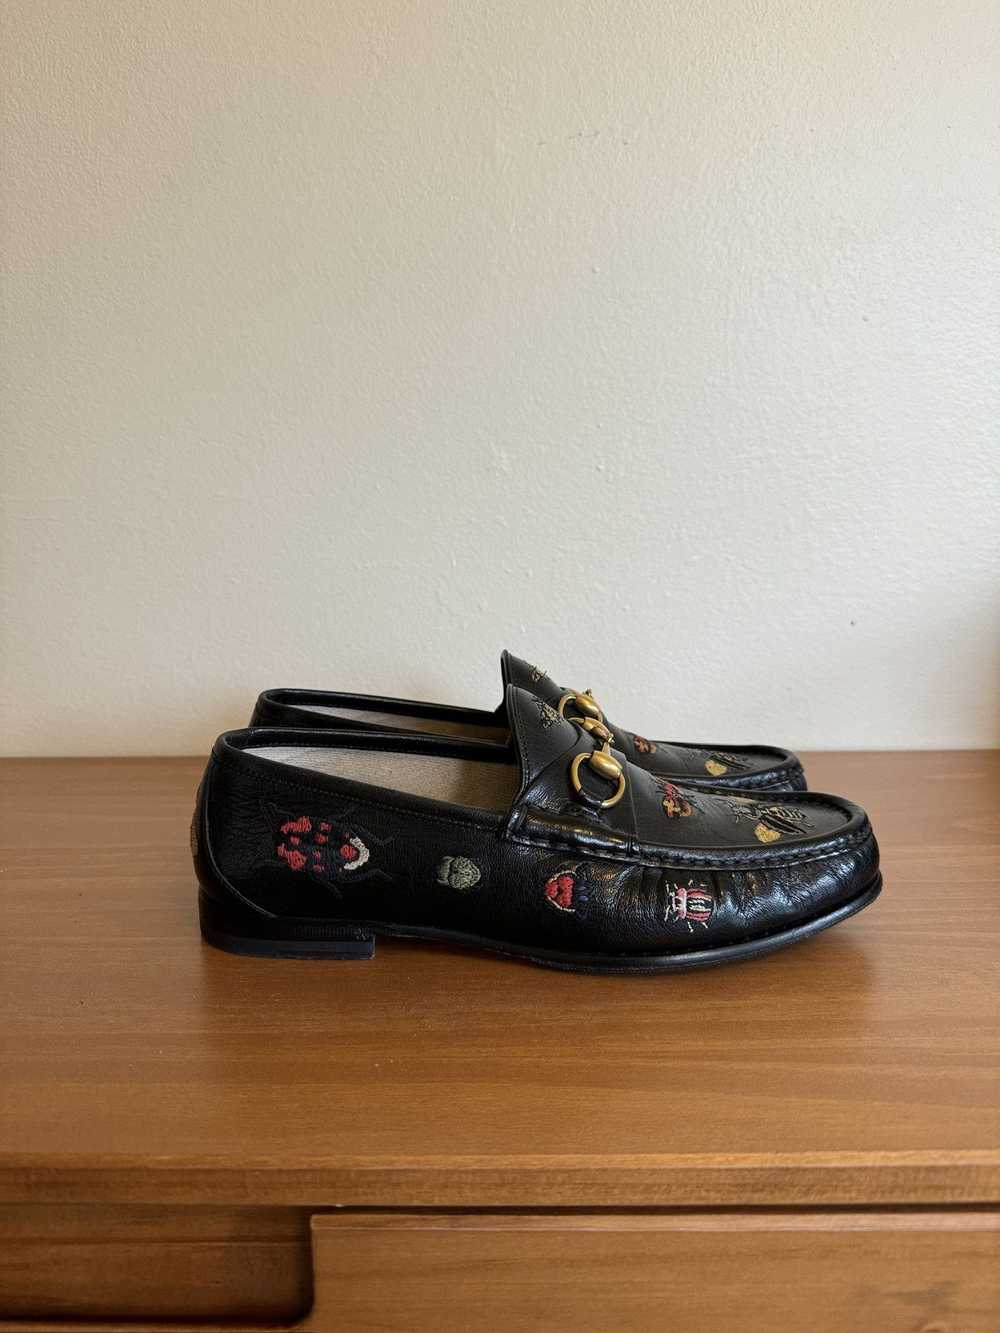 Gucci 1953 Embroidered Horsebit Loafers - image 1